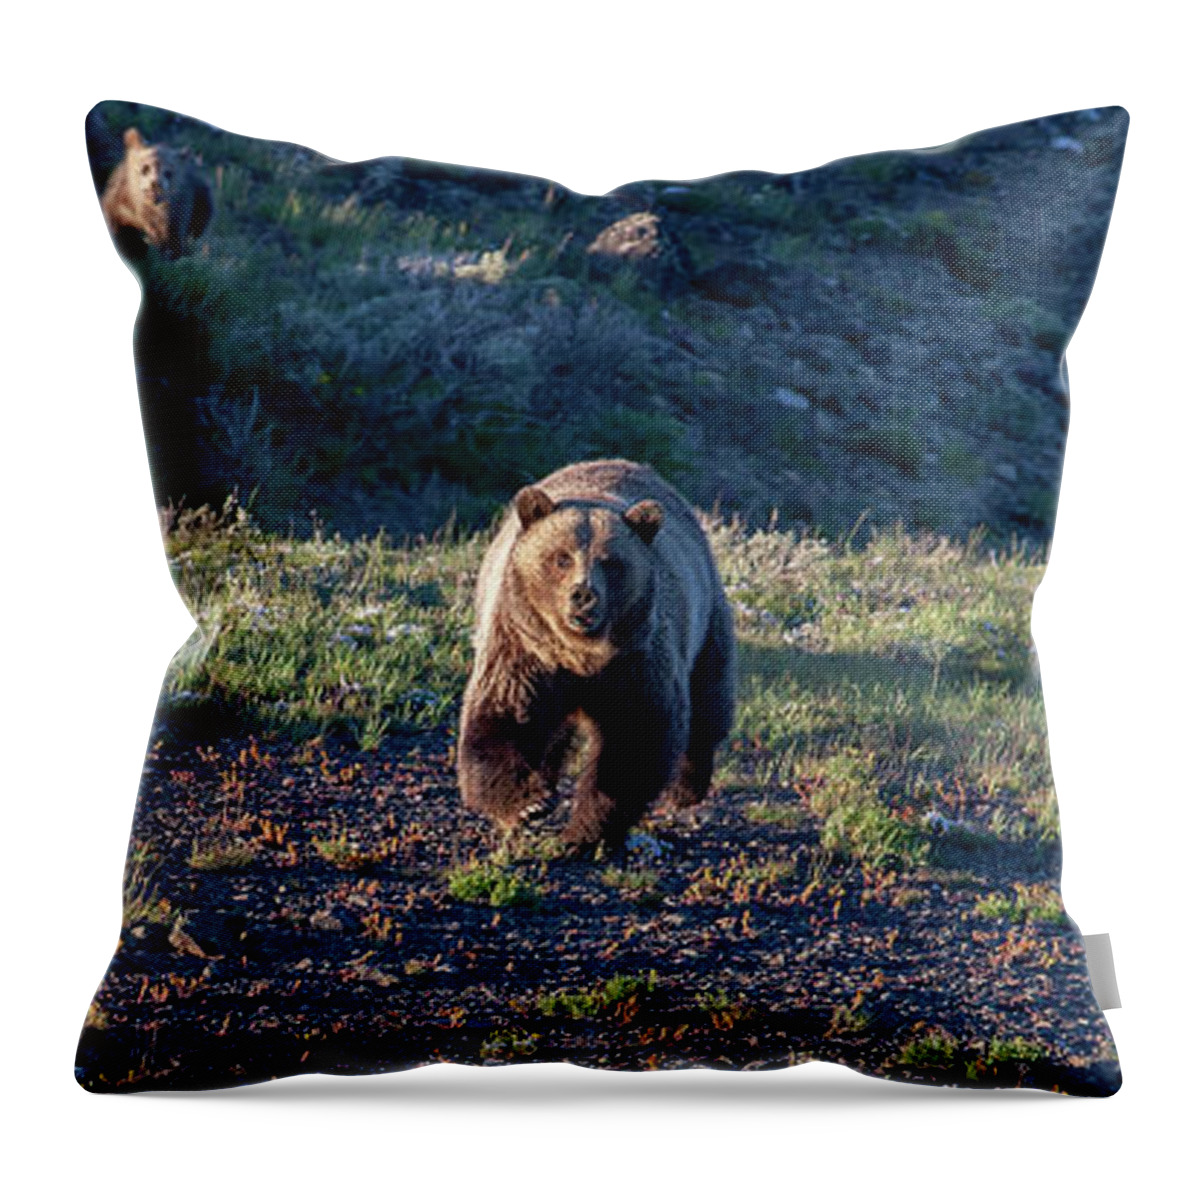 Grizzly Bear Throw Pillow featuring the photograph Charging Grizzly by Mark Miller